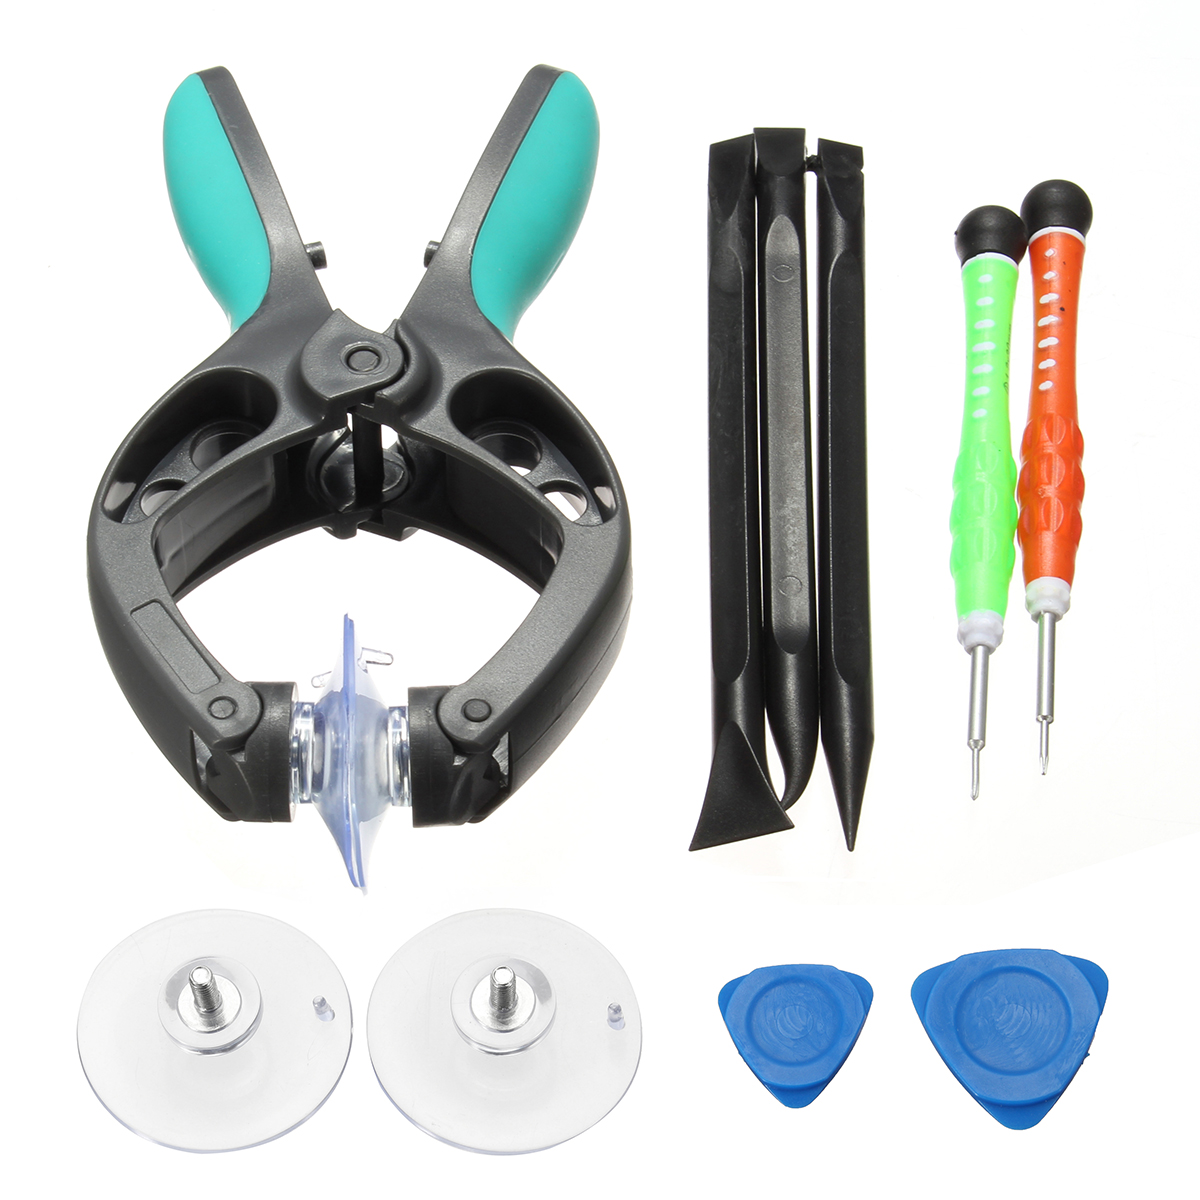 

10 in 1 Mobile Phone Repair Tools Kit LCD Screen Opening Pliers Tool Screwdrivers Pry Suction for Disassembly iPhone 5 5